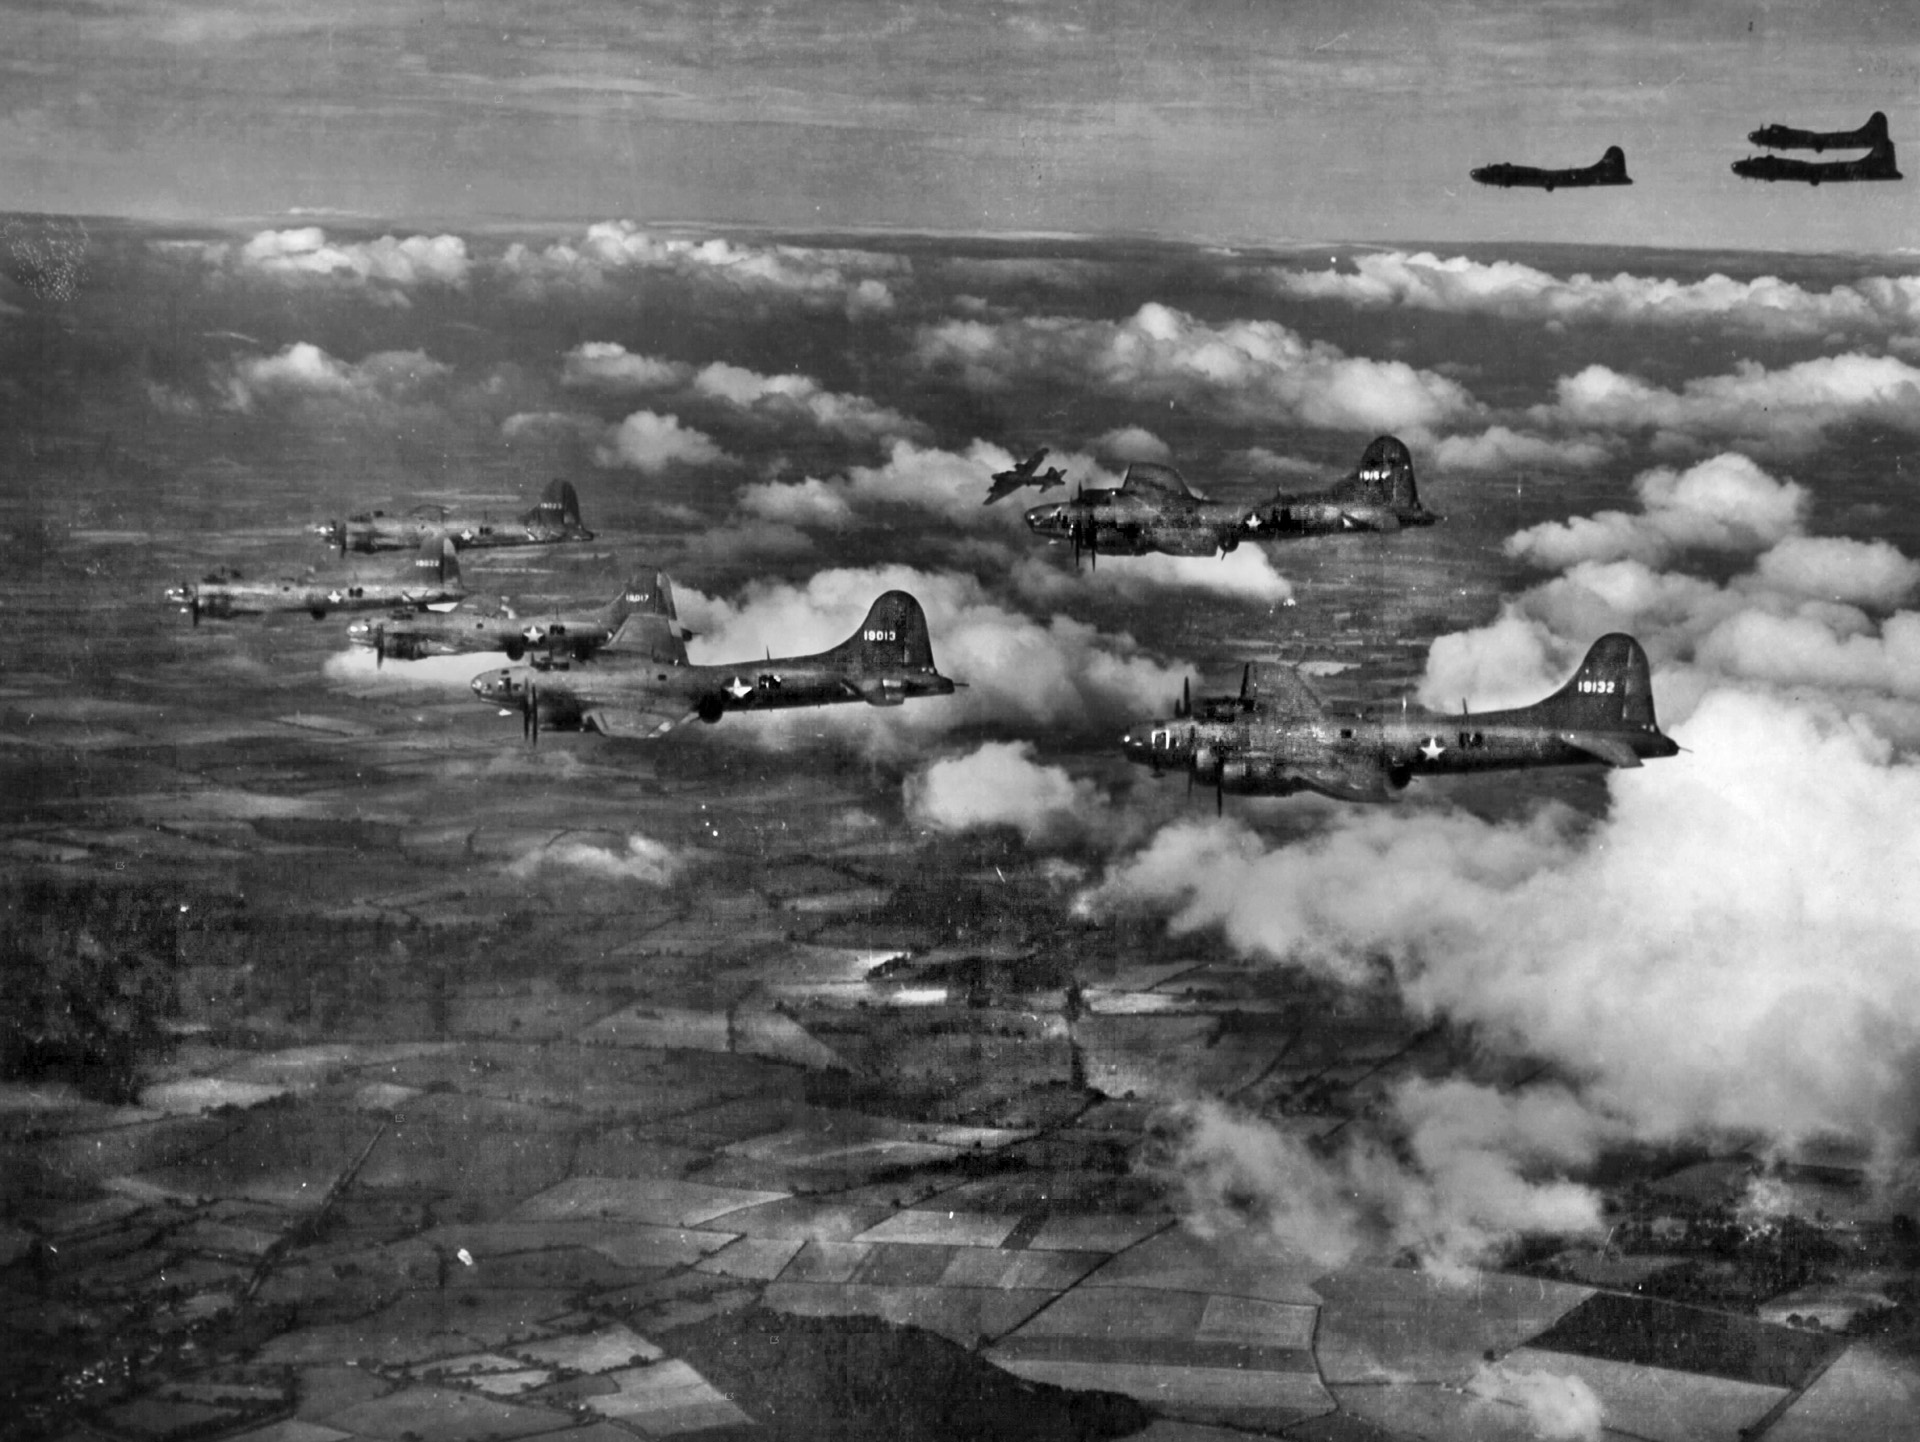 These Boeing B-17 Flying Fortress bombers, shown during a practice flight over England, flew the first combat mission over Europe during a bombing raid against Nazi-occupied Europe carried out by American aircraft.